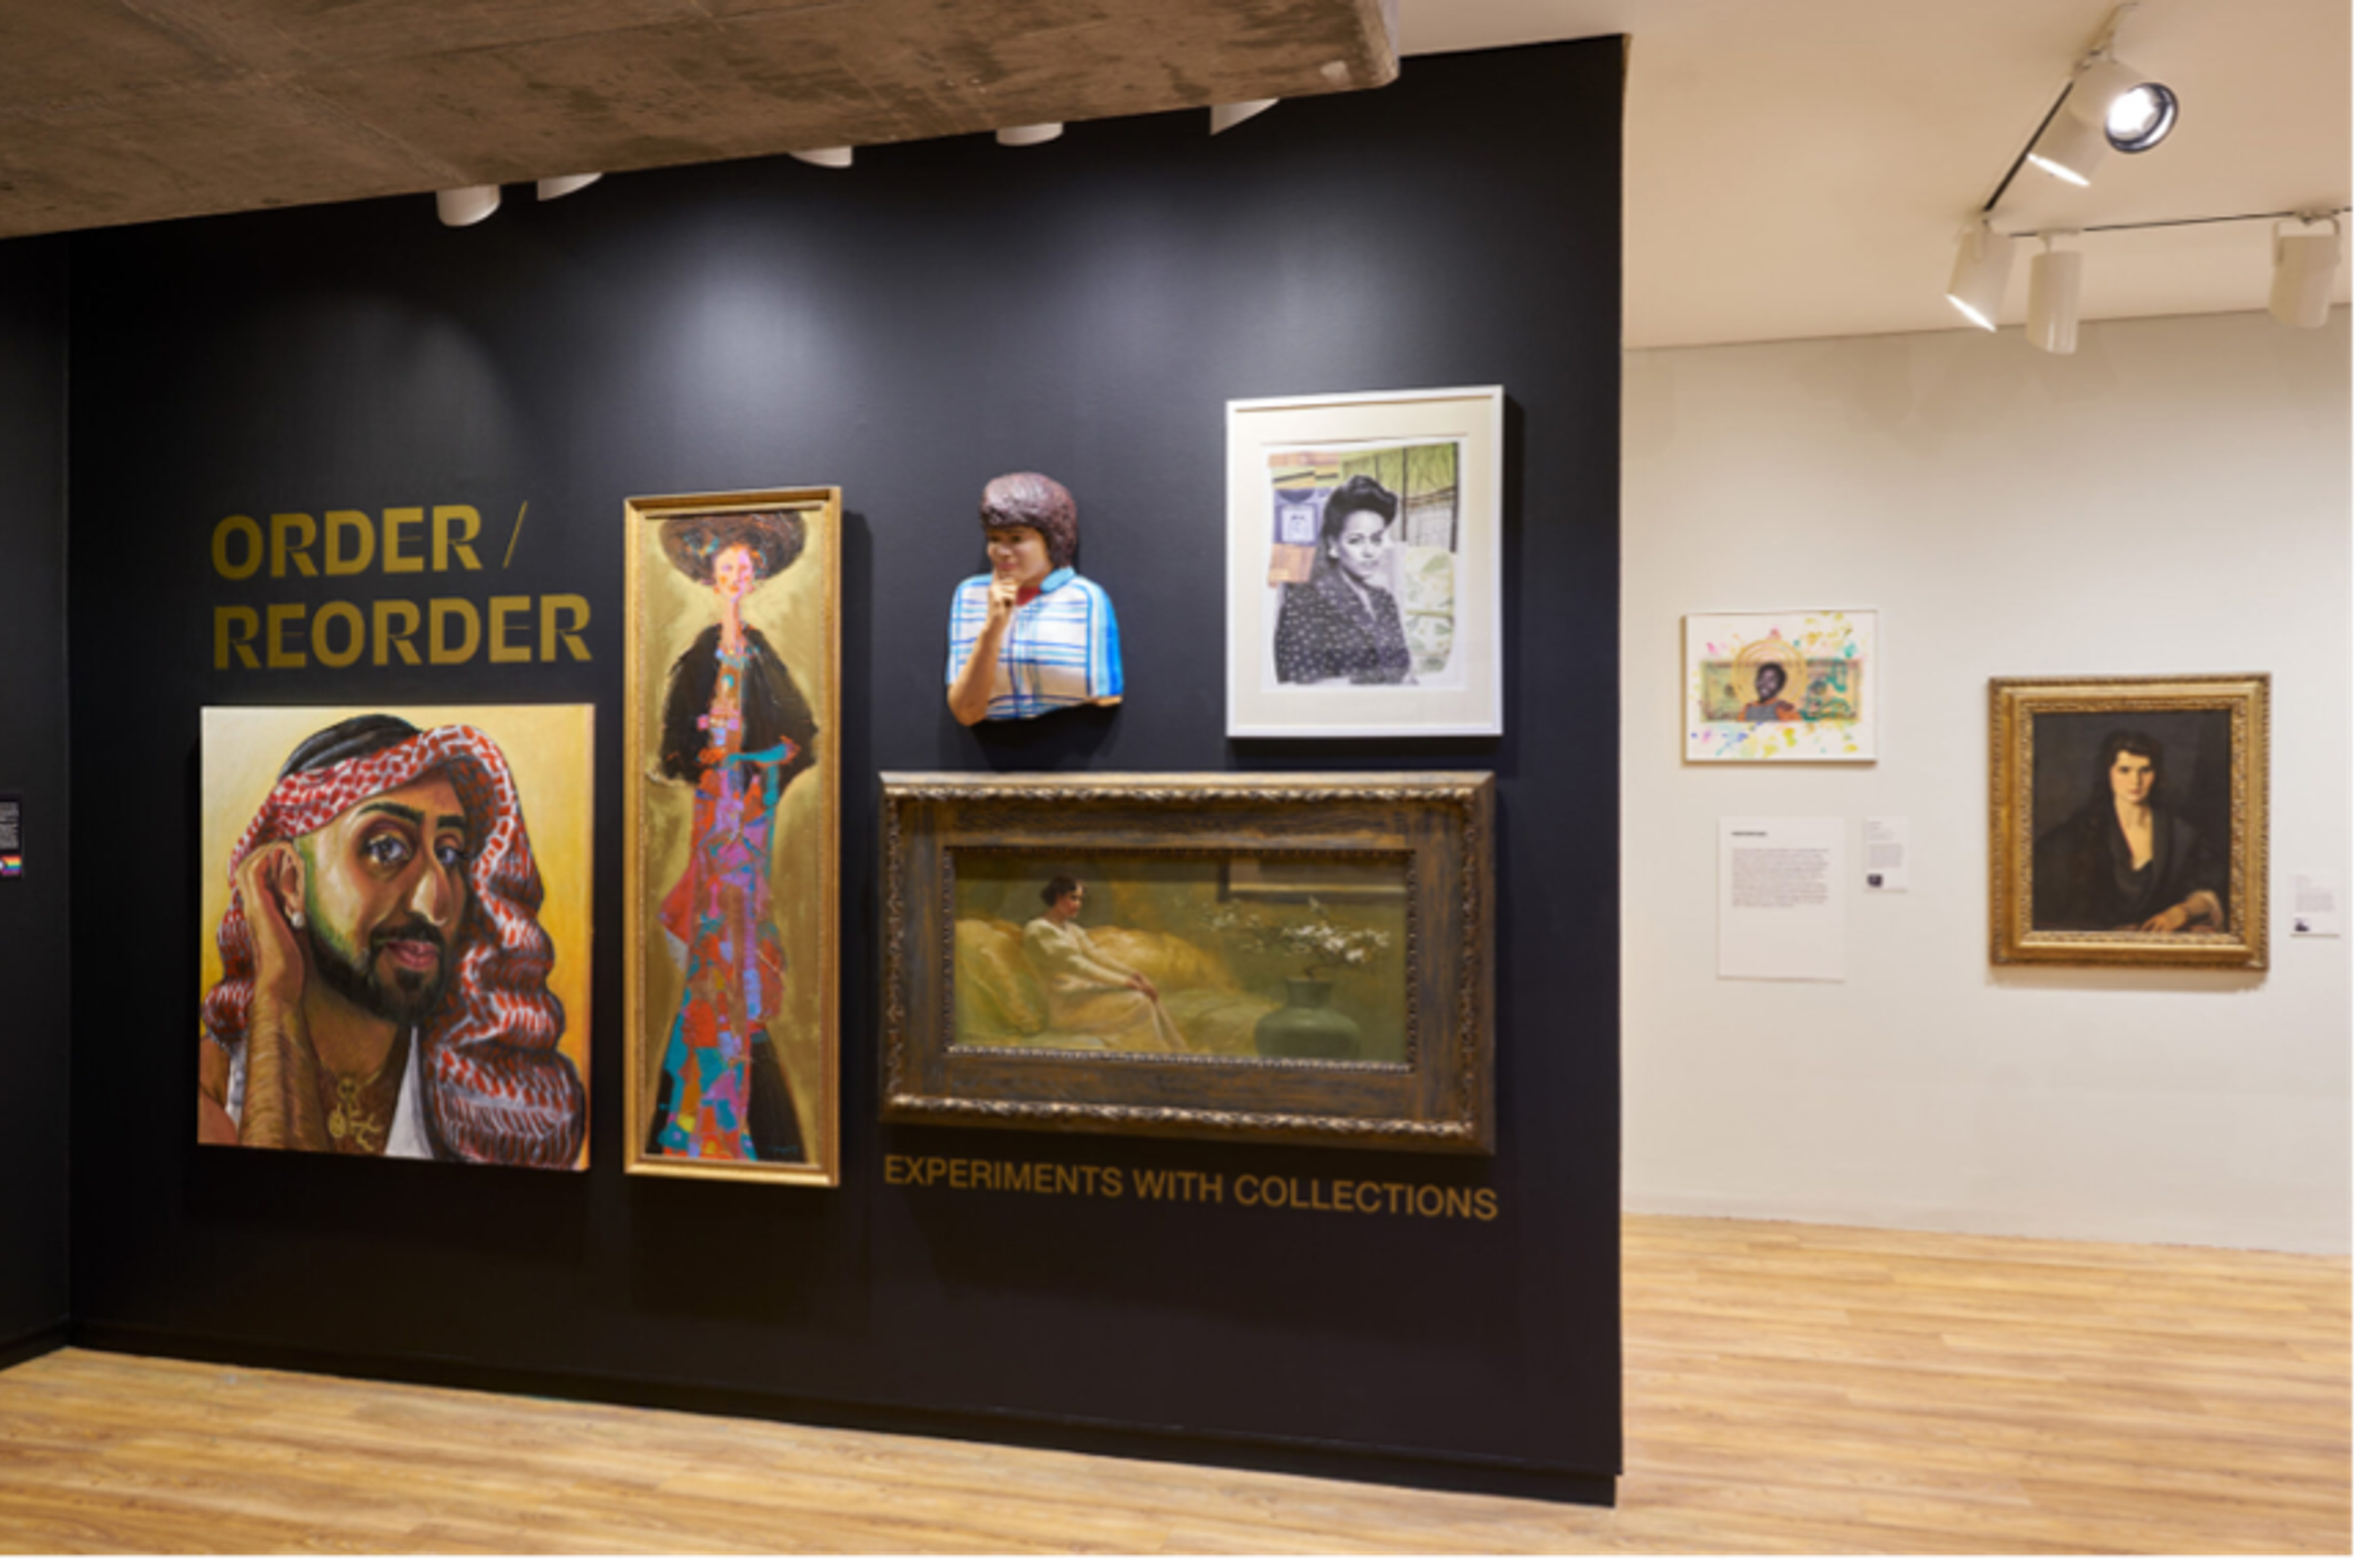 Order/Reorder: Experiments in Collections at the Hudson River Museum of Art